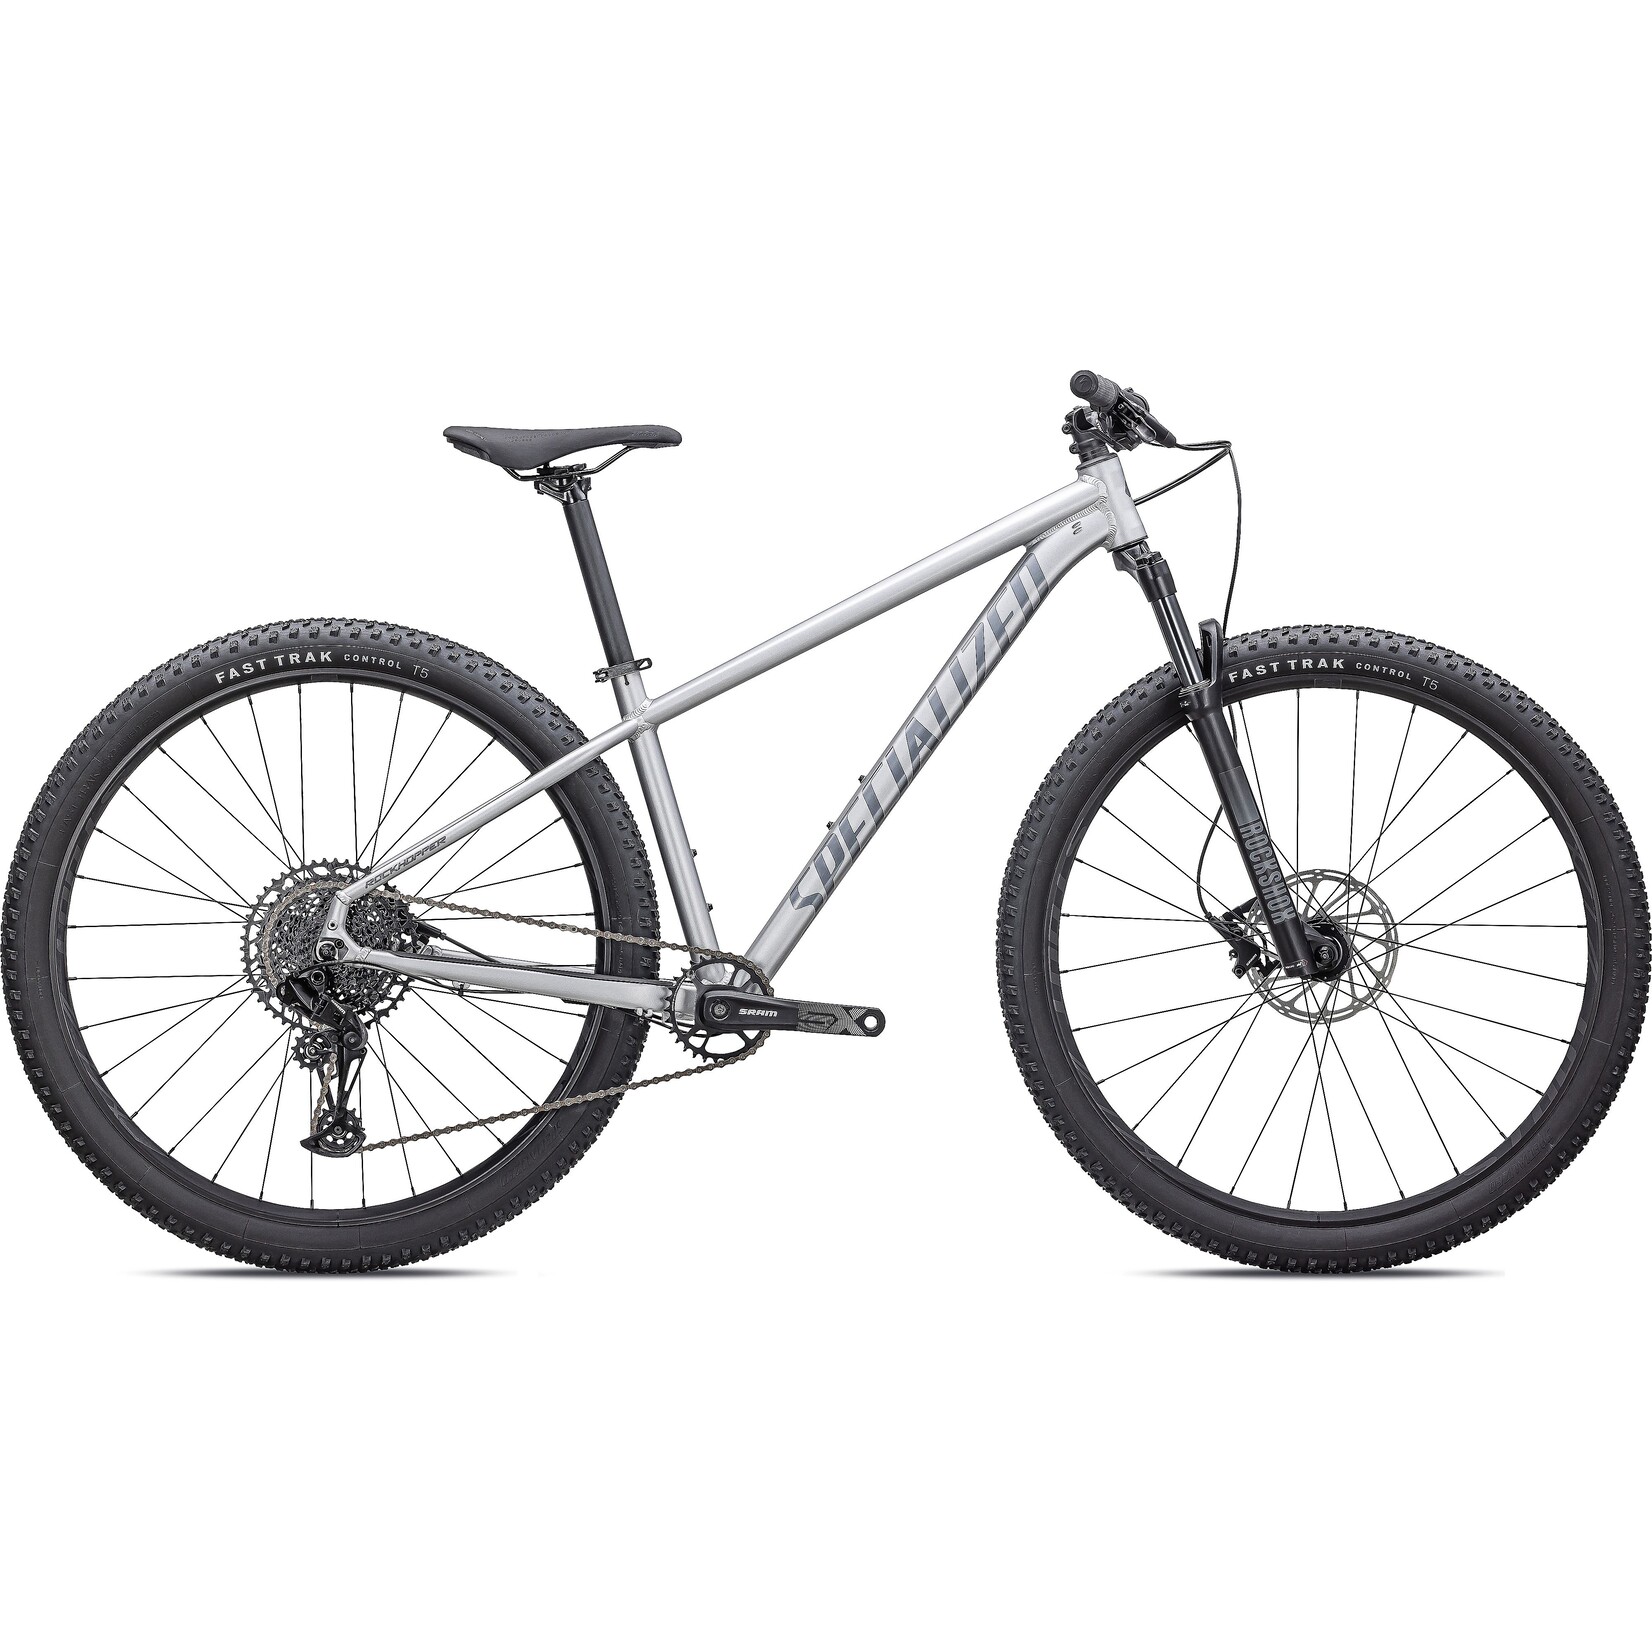 Specialized Rockhopper Expert 27.5 in SATIN SILVER DUST / BLACK HOLOGRAPHIC